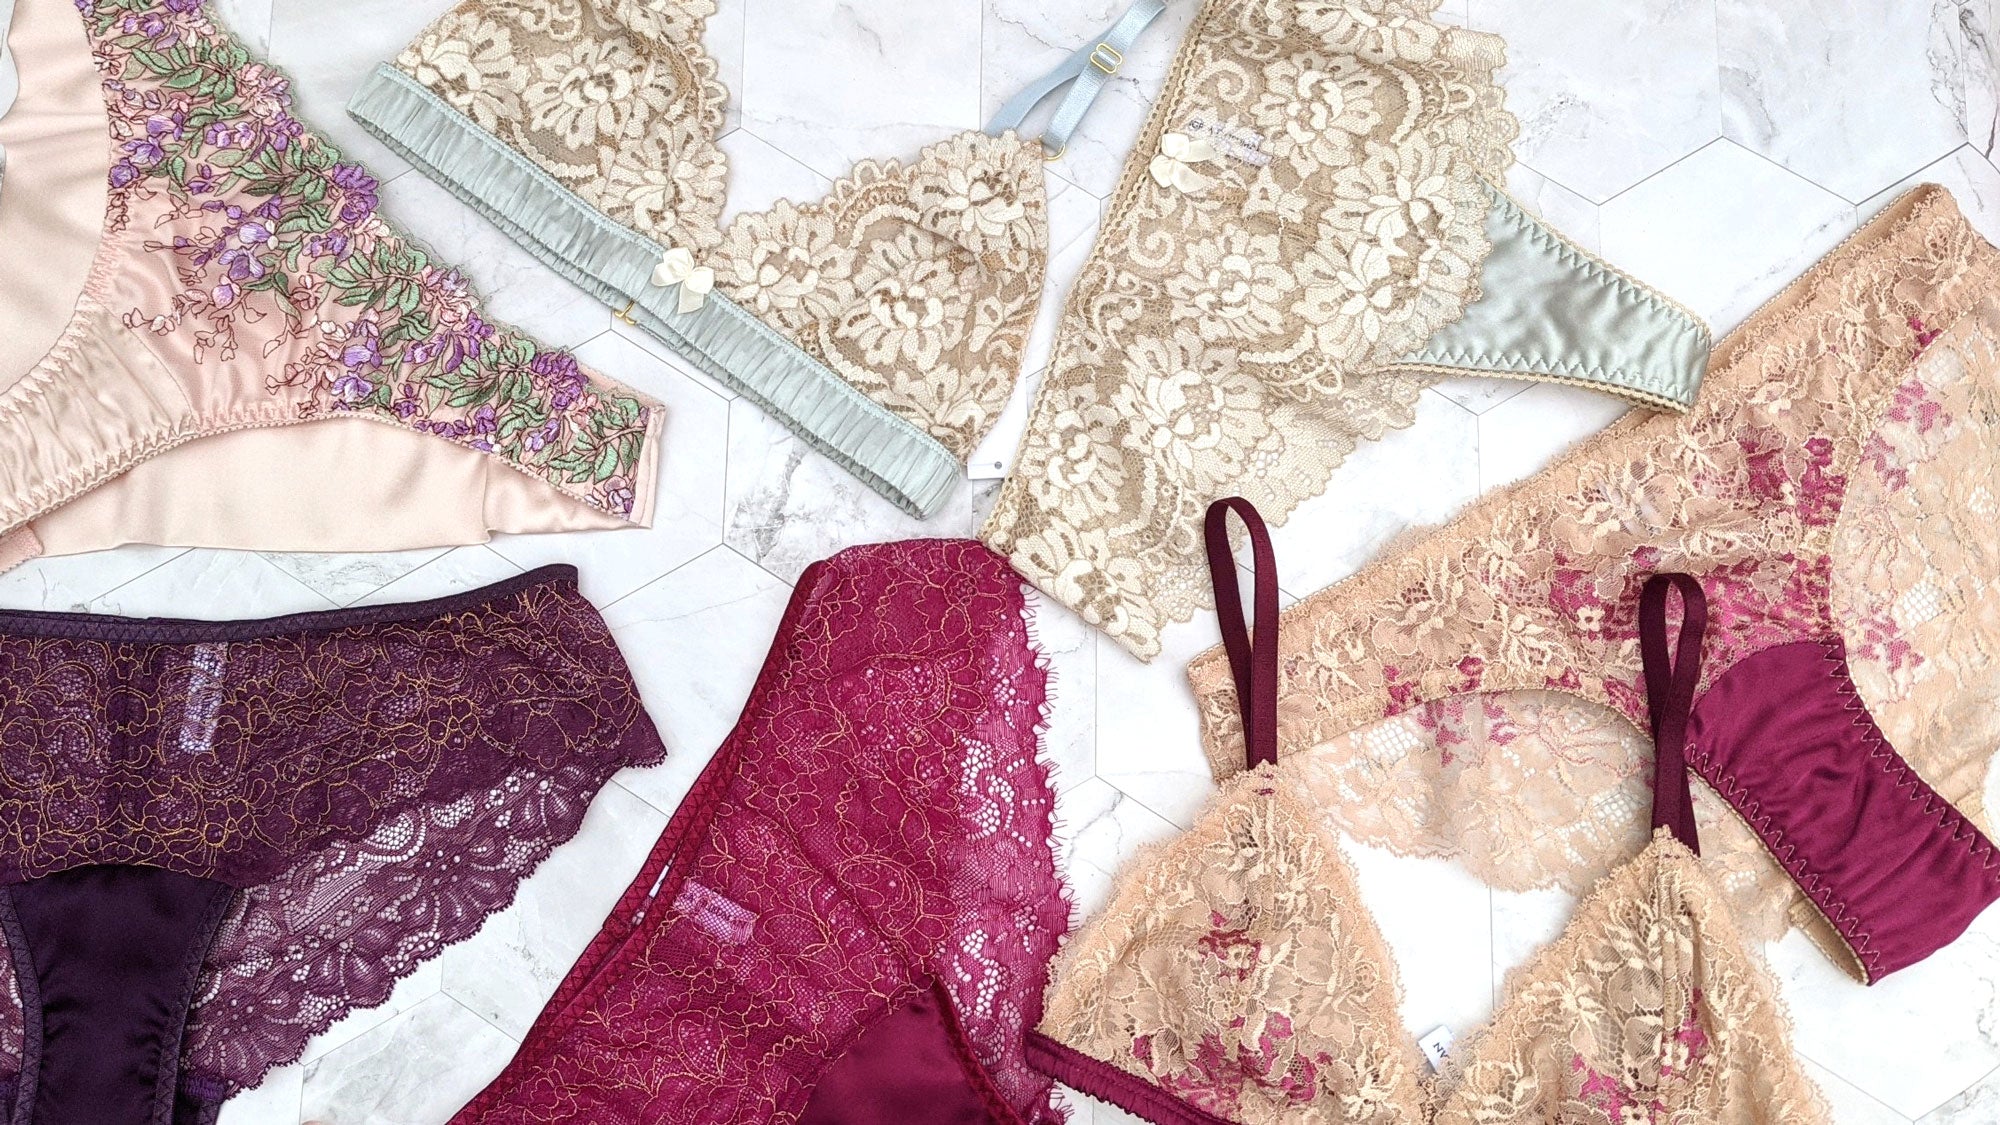 Silk lingerie sets and lace underwear pairs